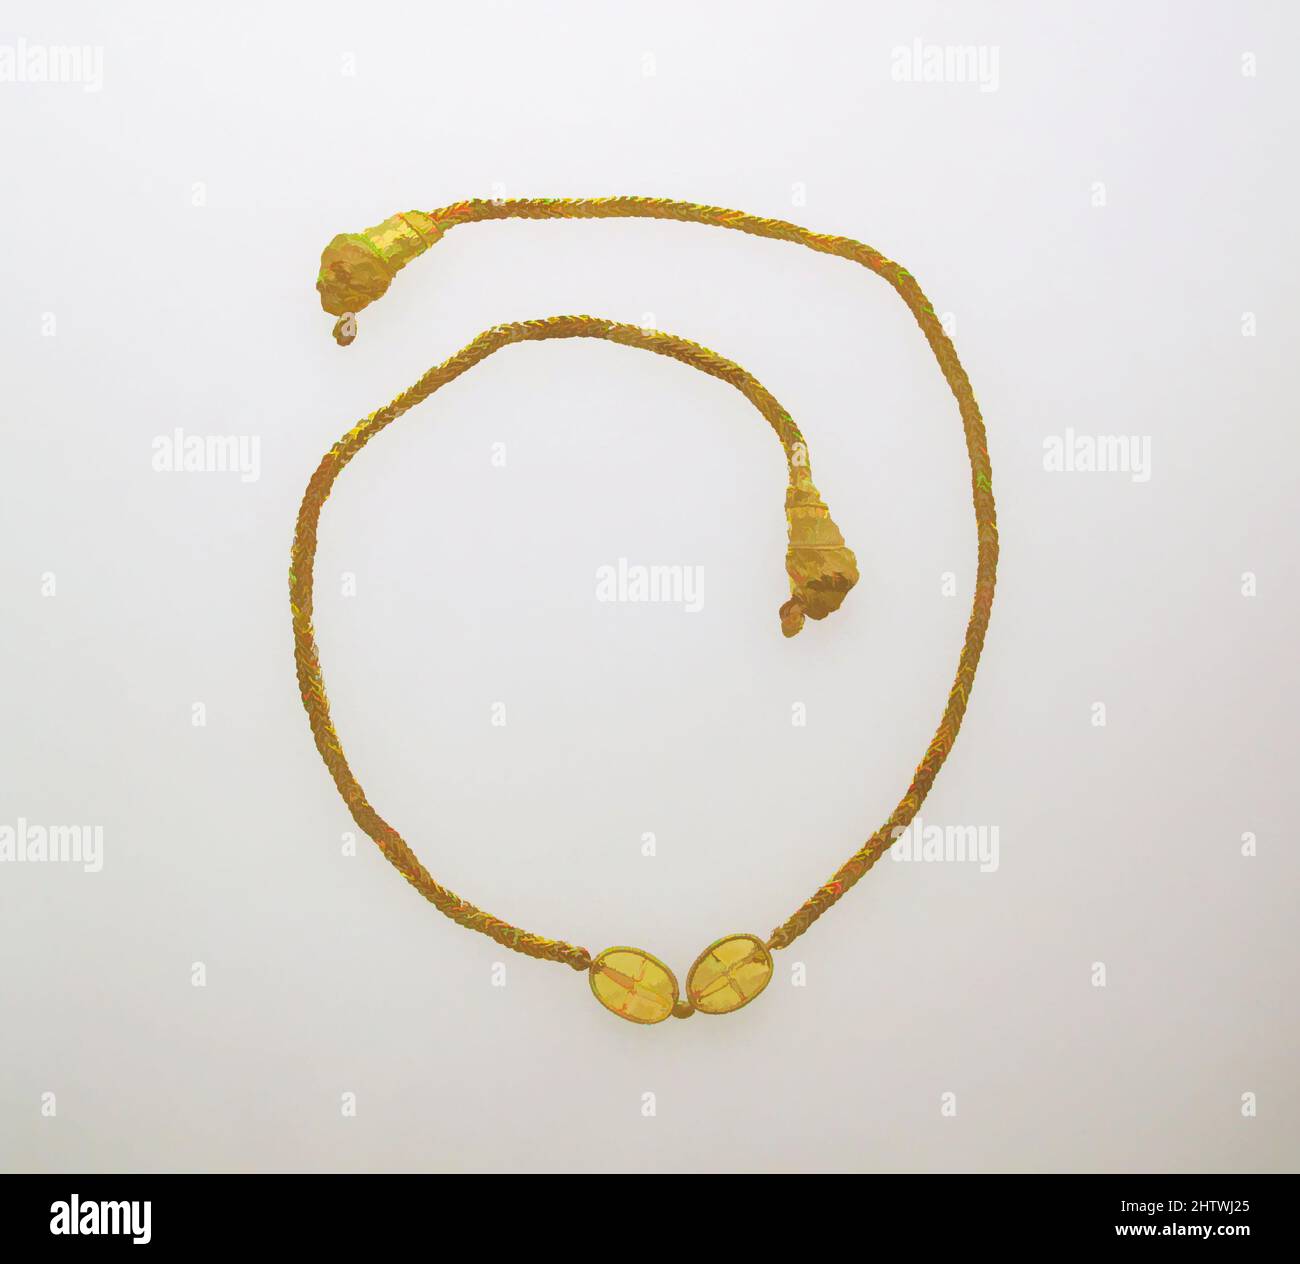 Art inspired by Necklace, chain, 7th–5th Century B.C., Etruscan, GOLD, Other: 18 1/2 in. (47 cm), Gold and Silver, Classic works modernized by Artotop with a splash of modernity. Shapes, color and value, eye-catching visual impact on art. Emotions through freedom of artworks in a contemporary way. A timeless message pursuing a wildly creative new direction. Artists turning to the digital medium and creating the Artotop NFT Stock Photo